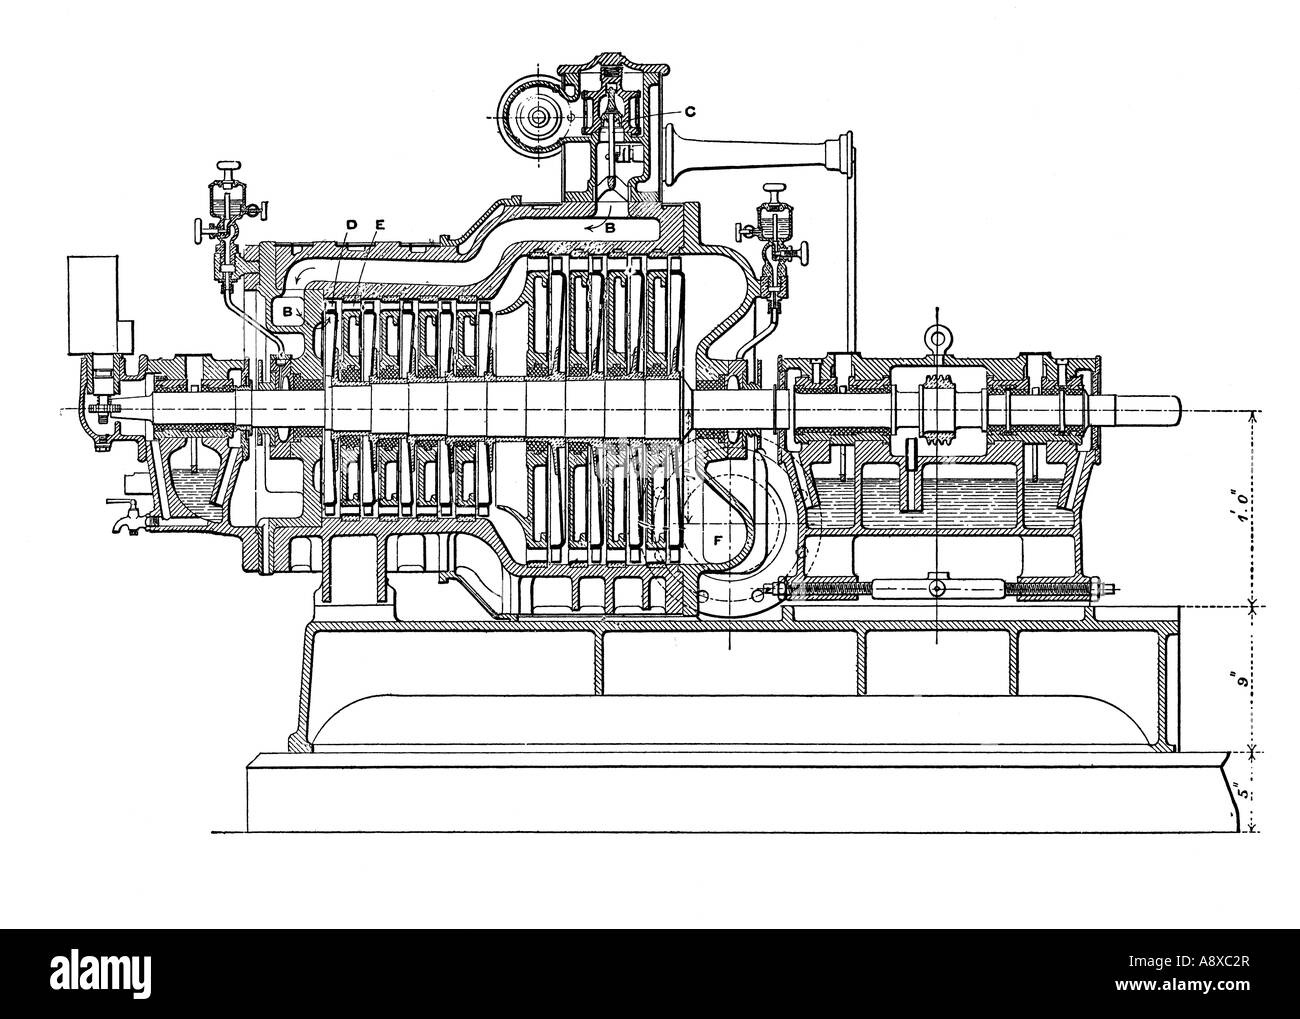 SECTION THROUGH RATEAU STEAM TURBINE BUILT BY THE OERLIKON COMPANY SWITZERLAND Stock Photo